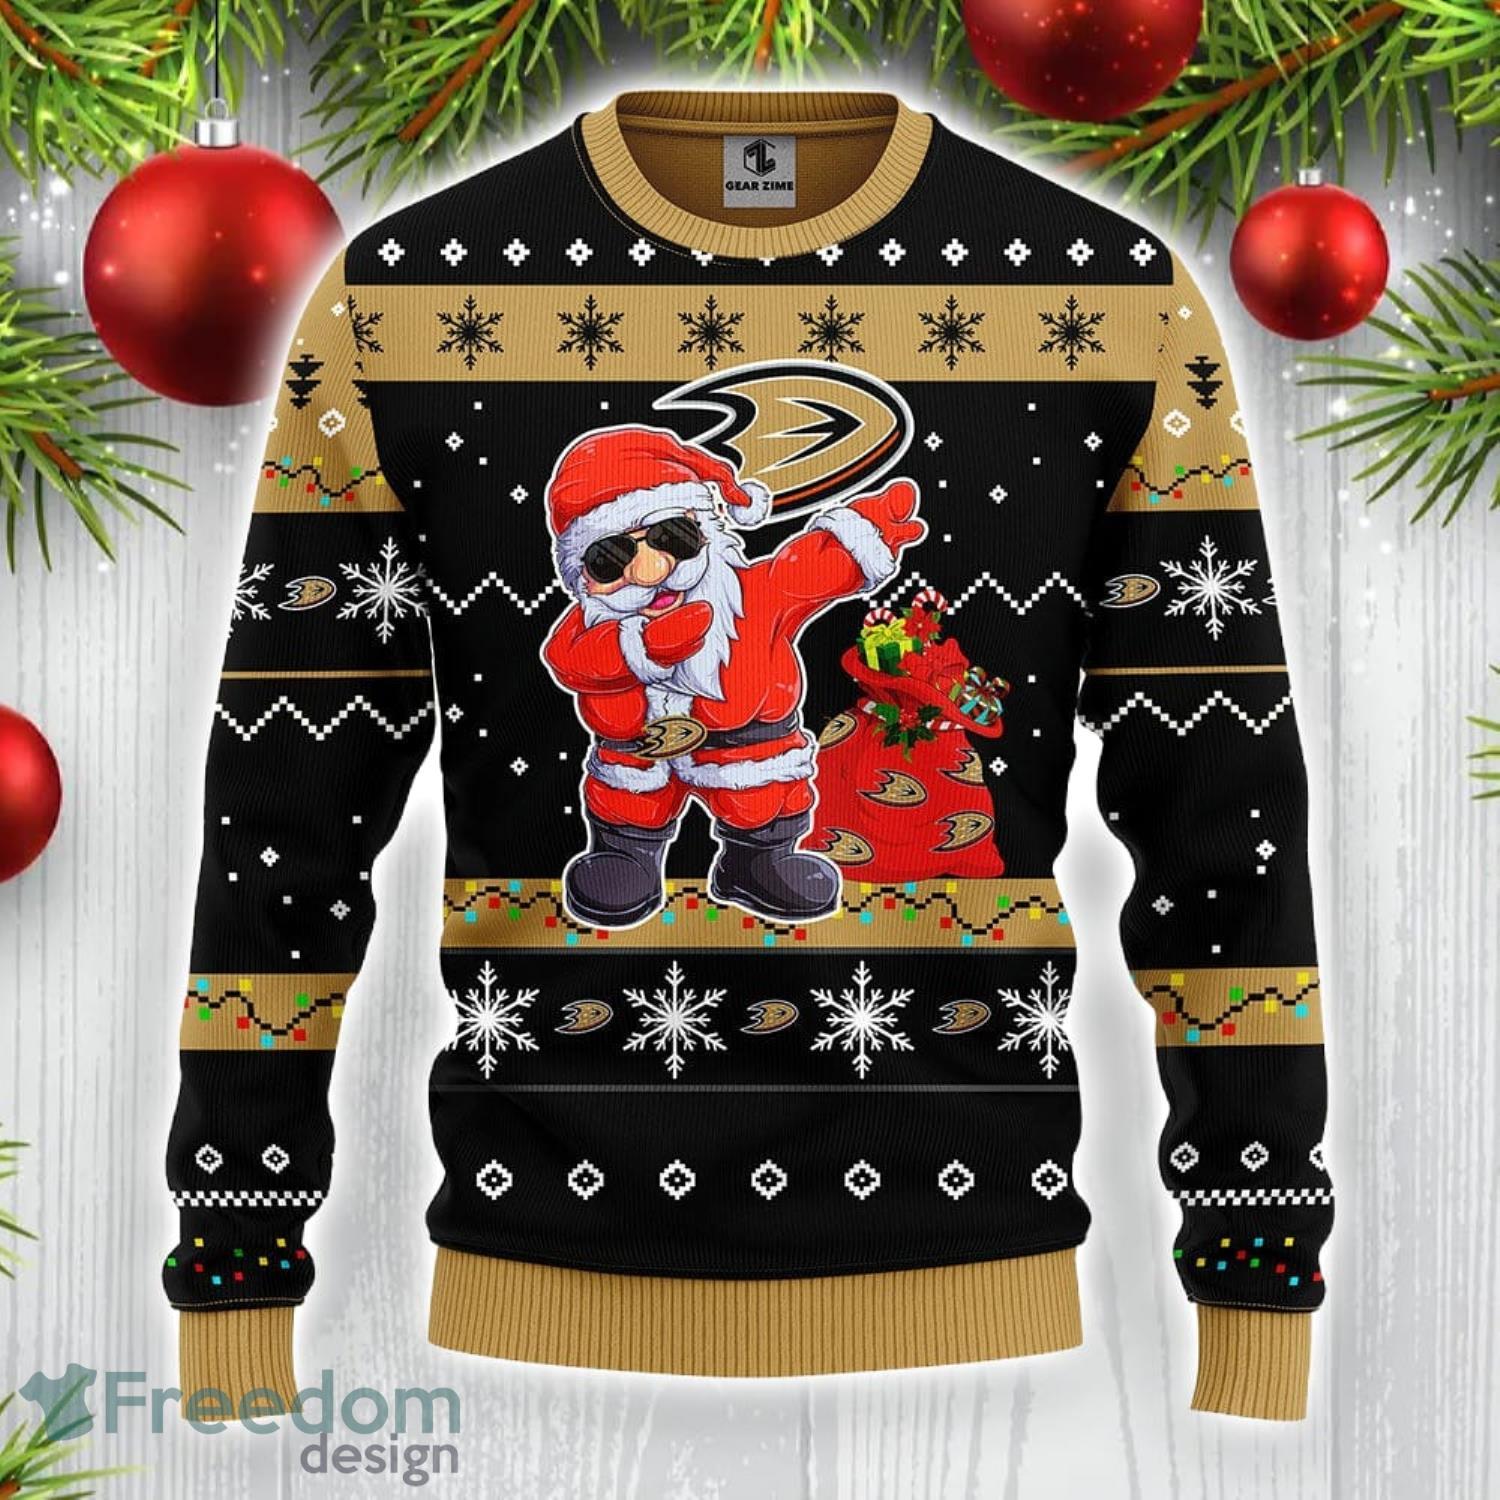 Mighty Ducks Ugly Christmas Sweater Spectacular Santa Claus Anaheim Ducks  Gift - Personalized Gifts: Family, Sports, Occasions, Trending